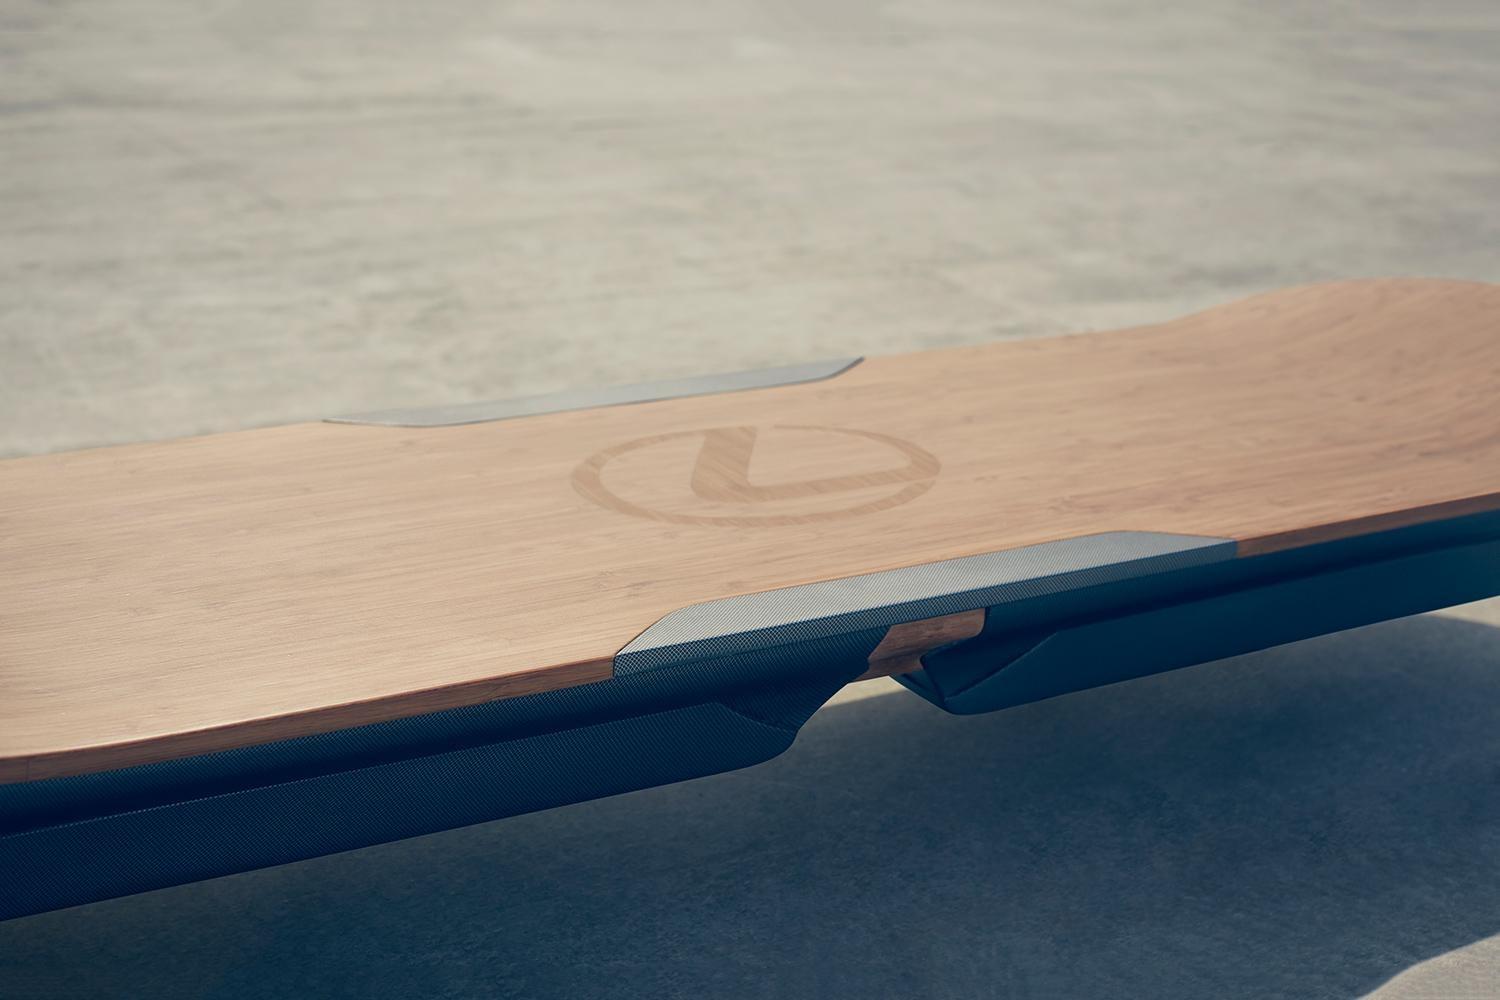 lexus hoverboard news pictures video amazing in motion slide hoeverboard 002 1500x1000